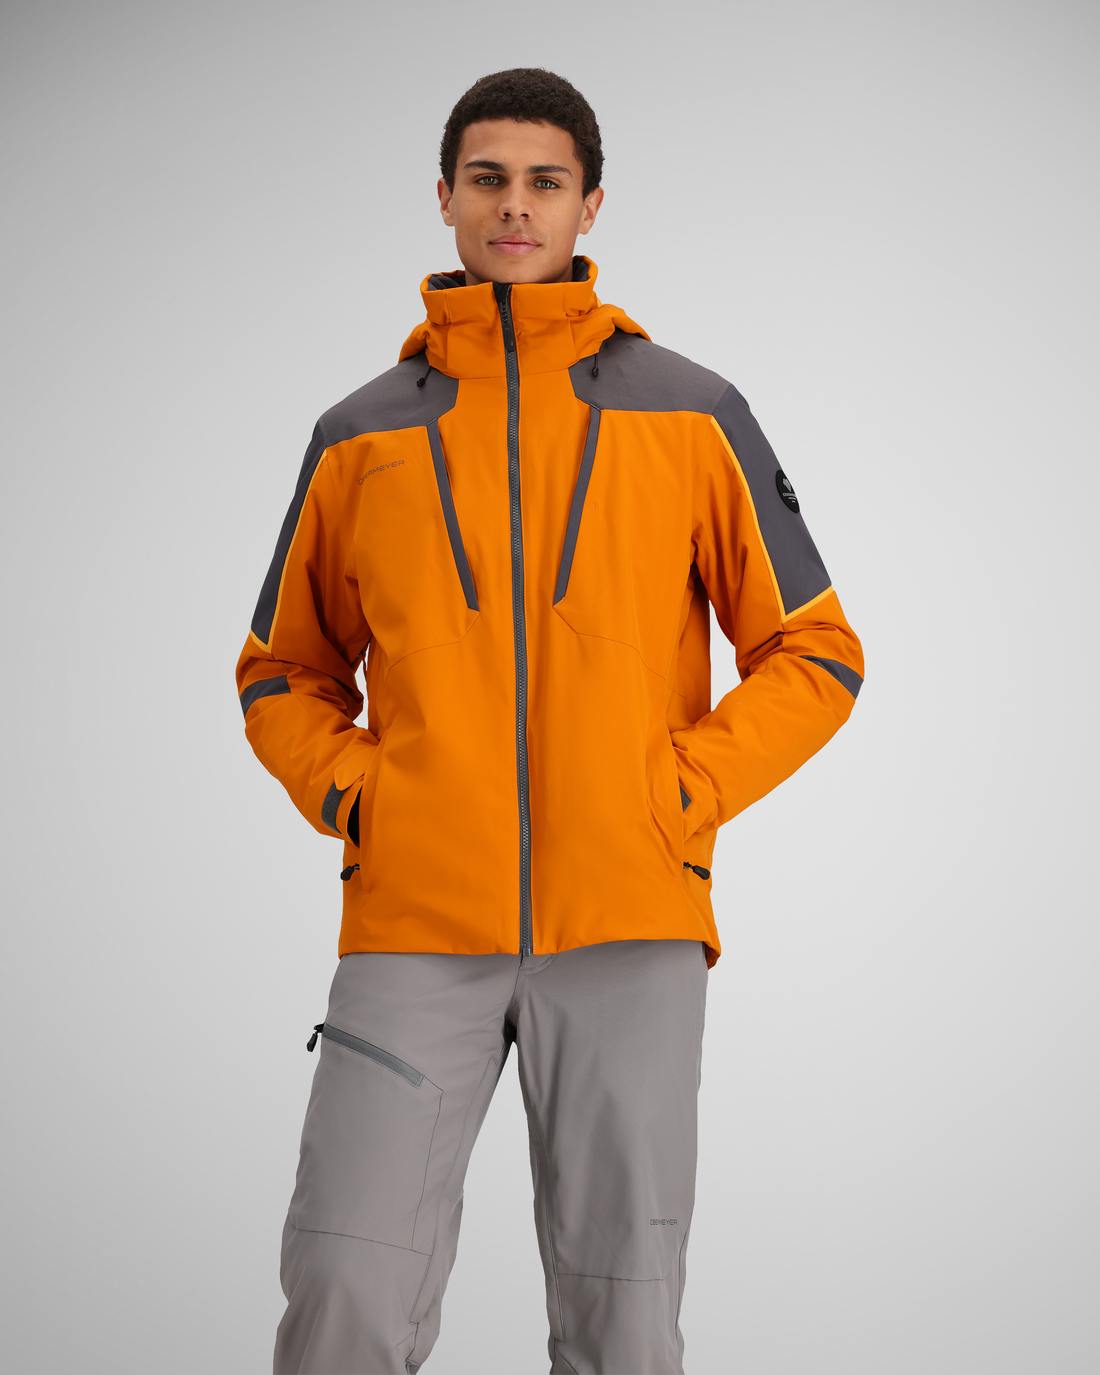 Unlock Wilderness' choice in the Obermeyer Vs North Face comparison, the Foundation Jacket by Obermeyer